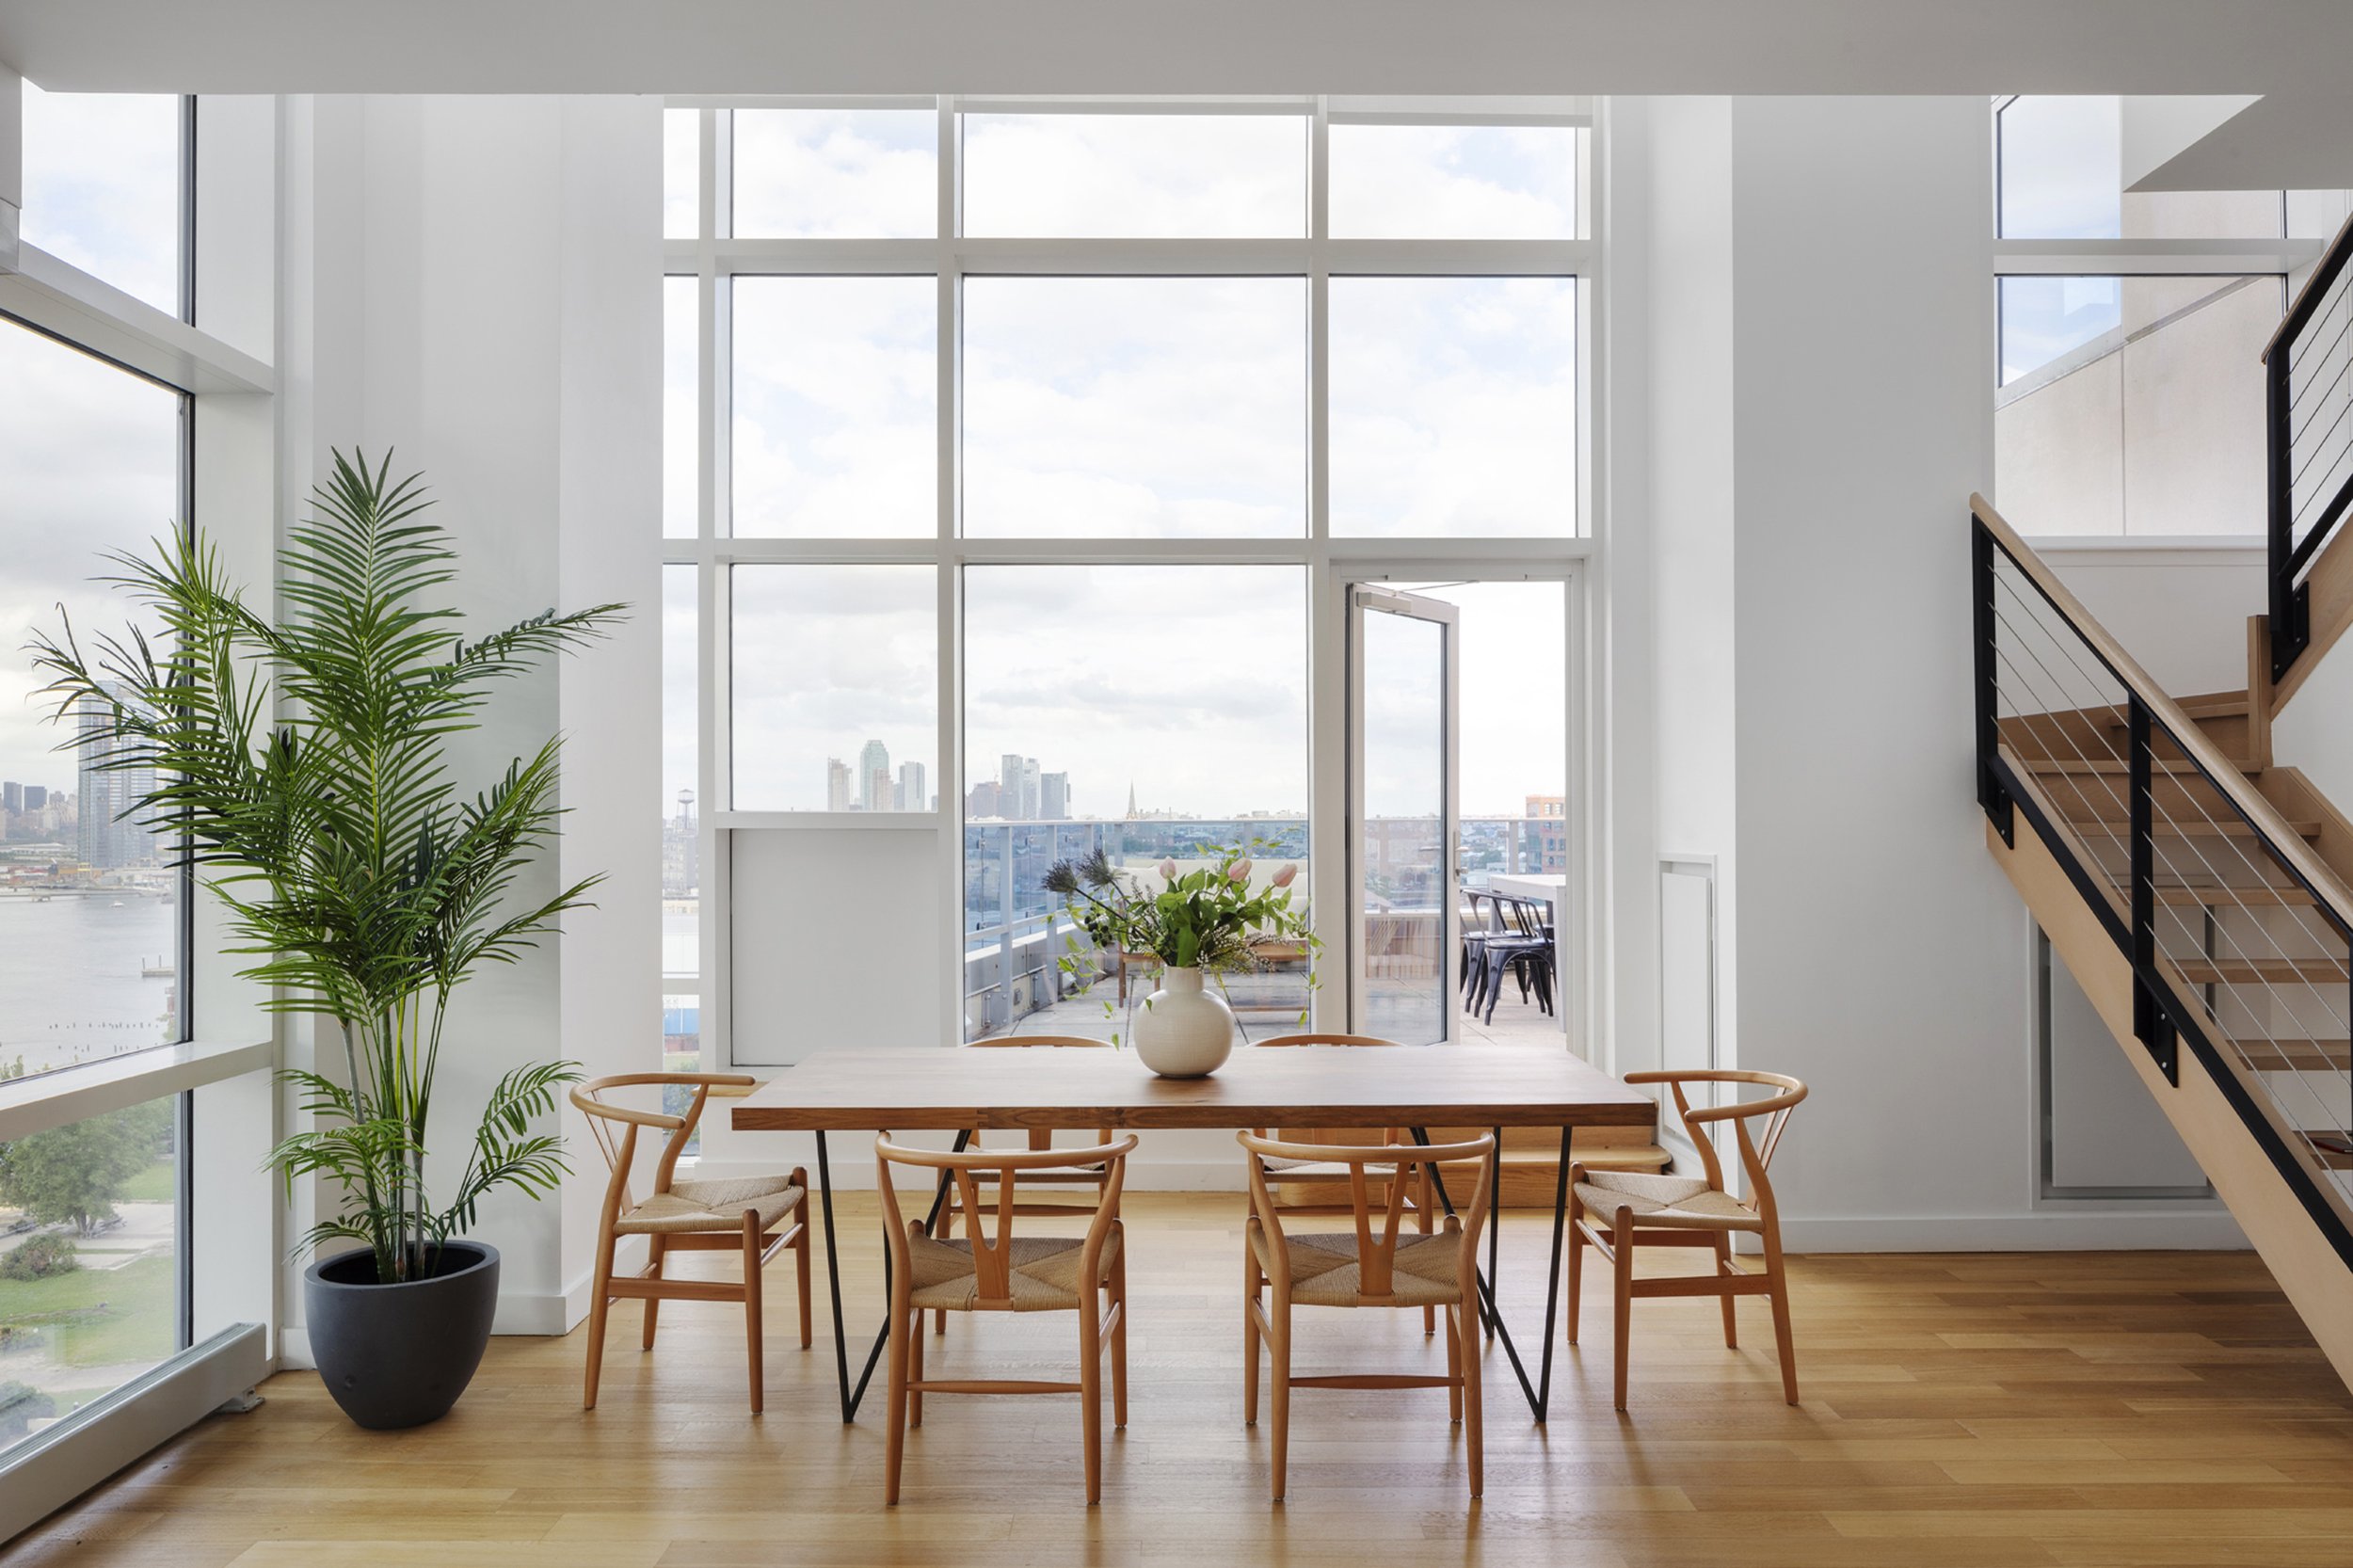  Hovey Design  North 7th Street PH1C   Step into this open 18’4” ceiling height dining room on your way to the 347.8 sqft private balcony as you overlook Brooklyn’s water front. Sold by Harkov Lewis Team at Halstead and staged by Hovey Design this th